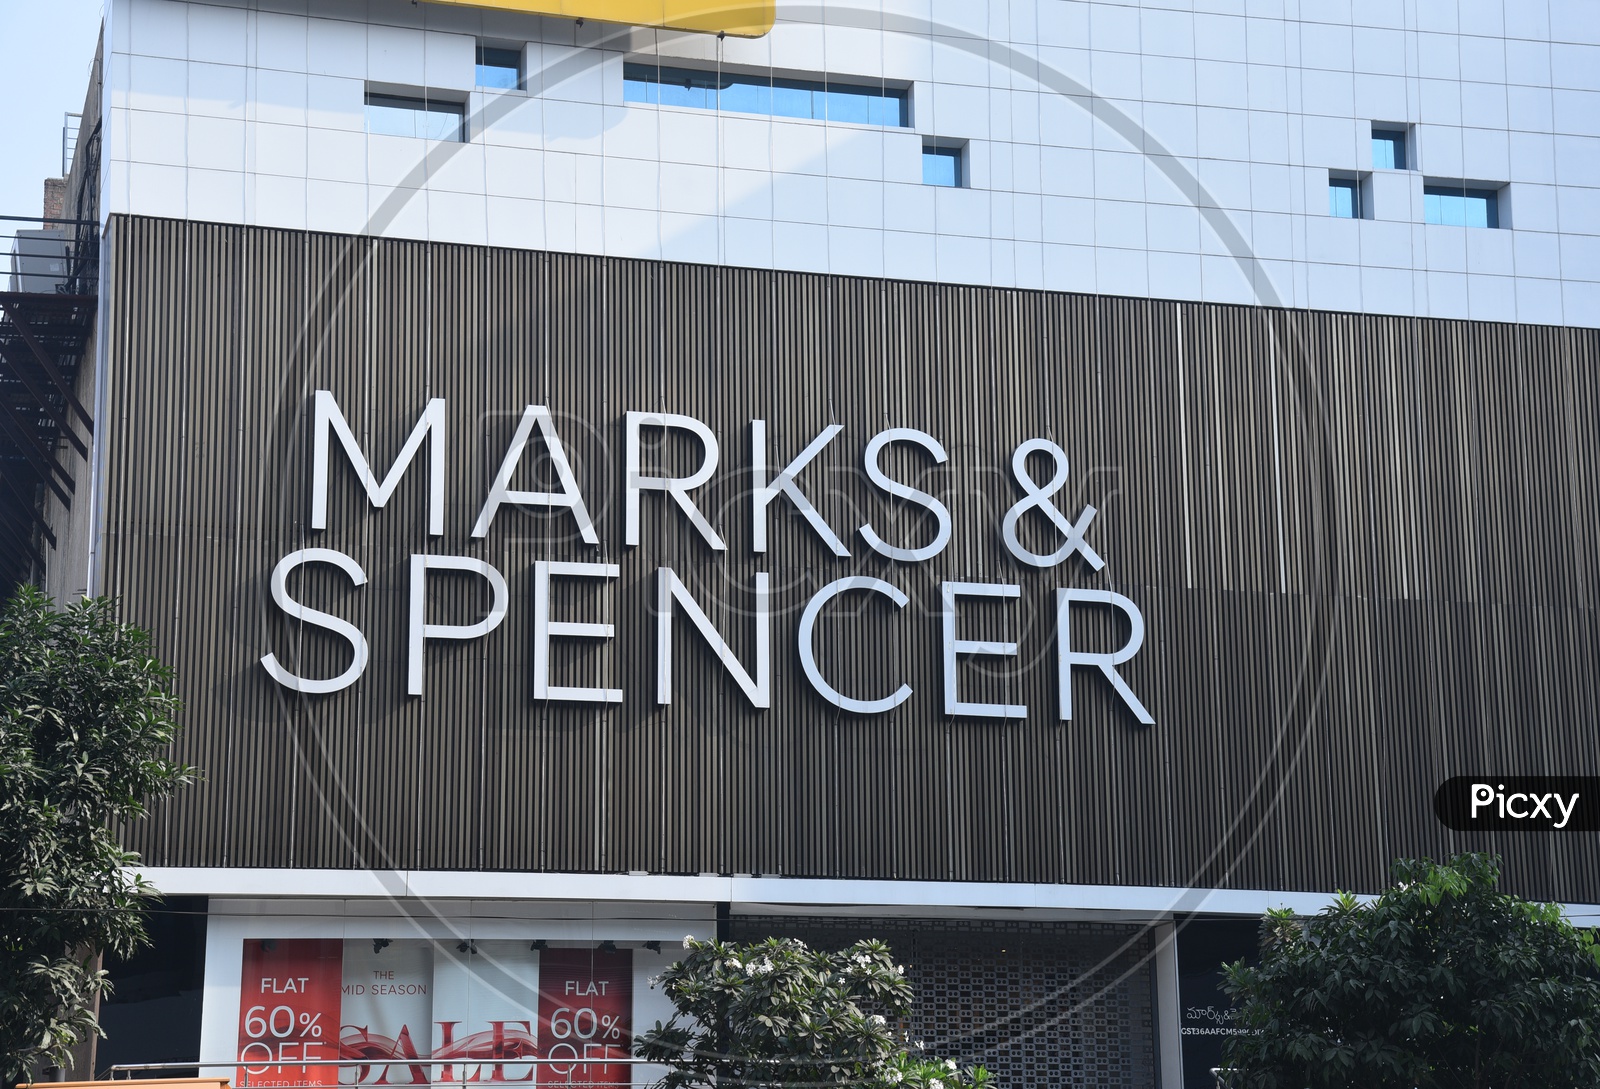 Marks & Spencer  Shopping Mall Jubilee hills Road no 36. 